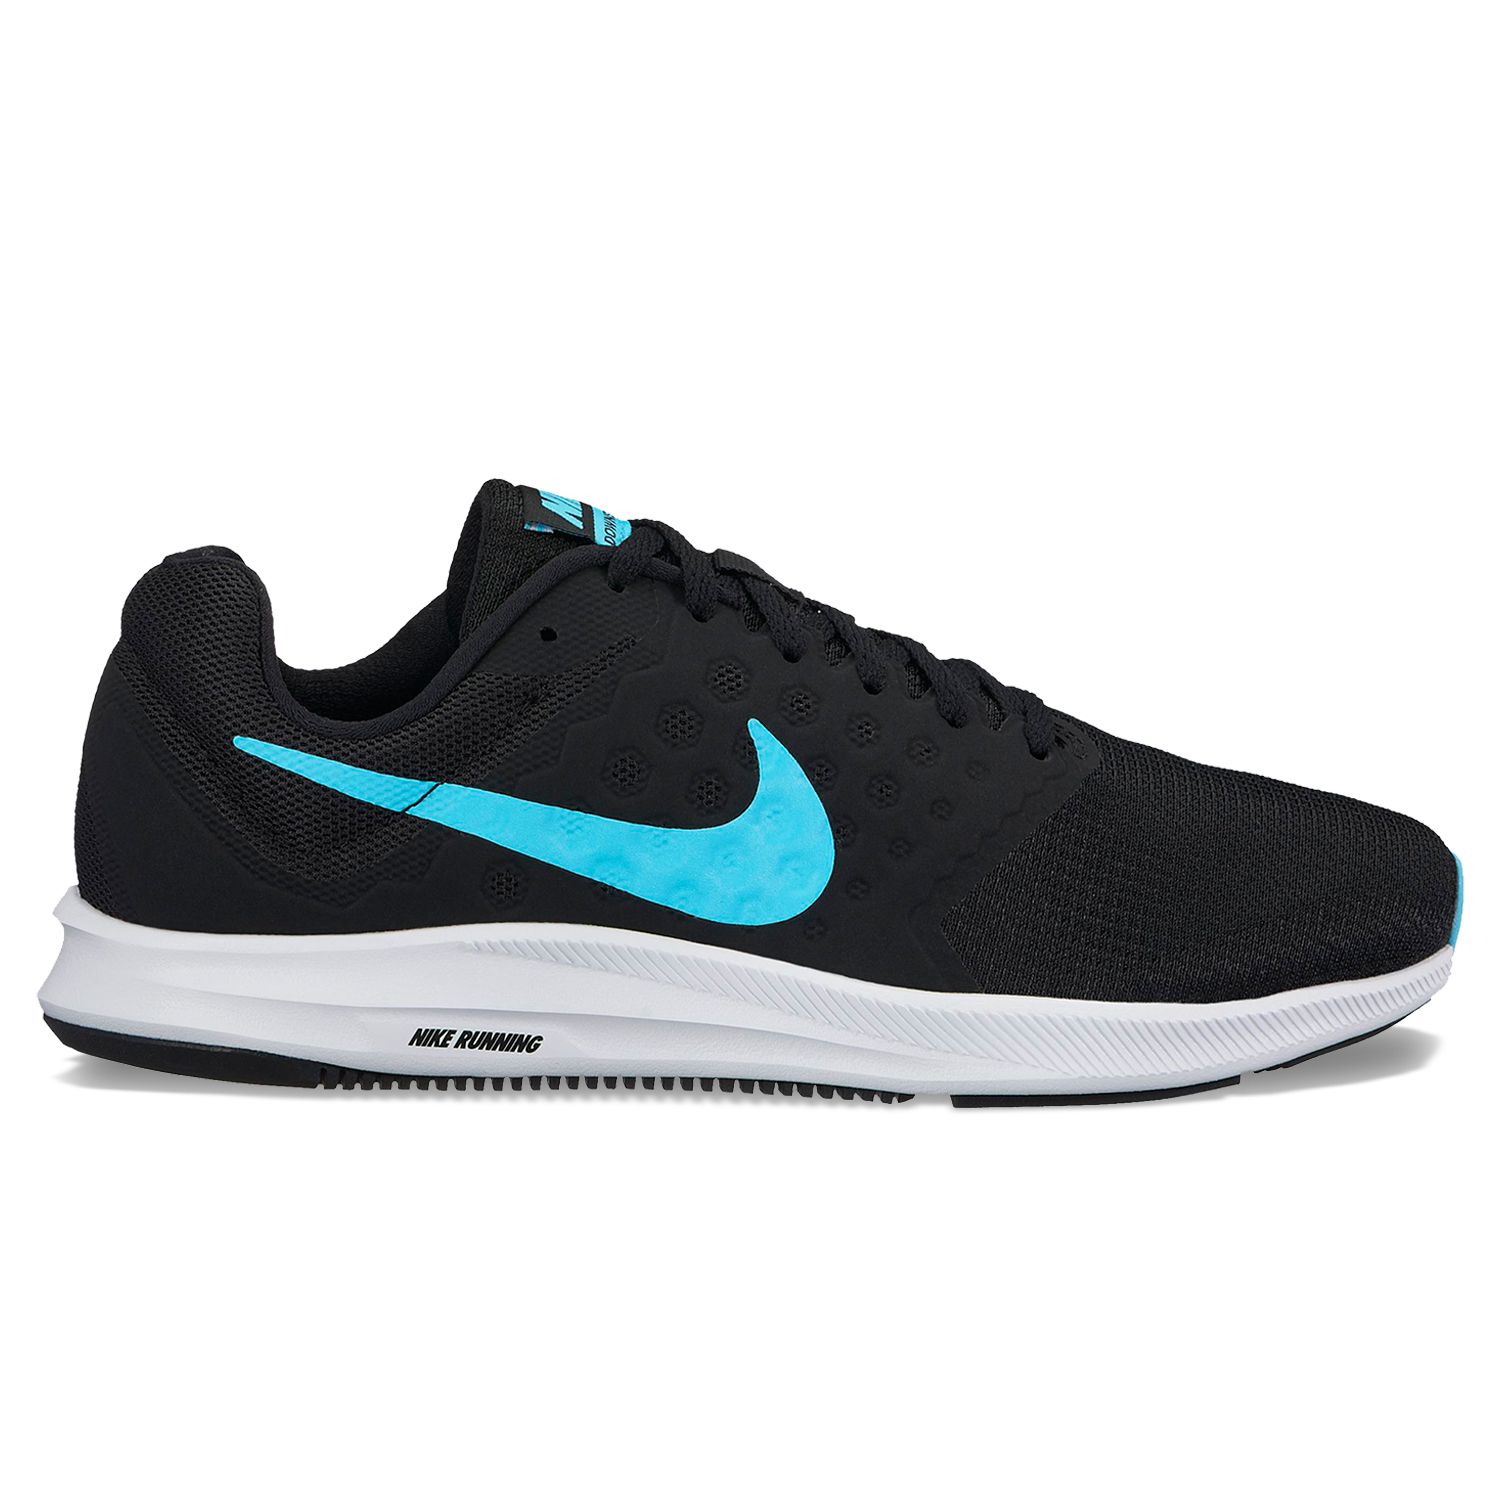 nike downshifter 7 women's black and white